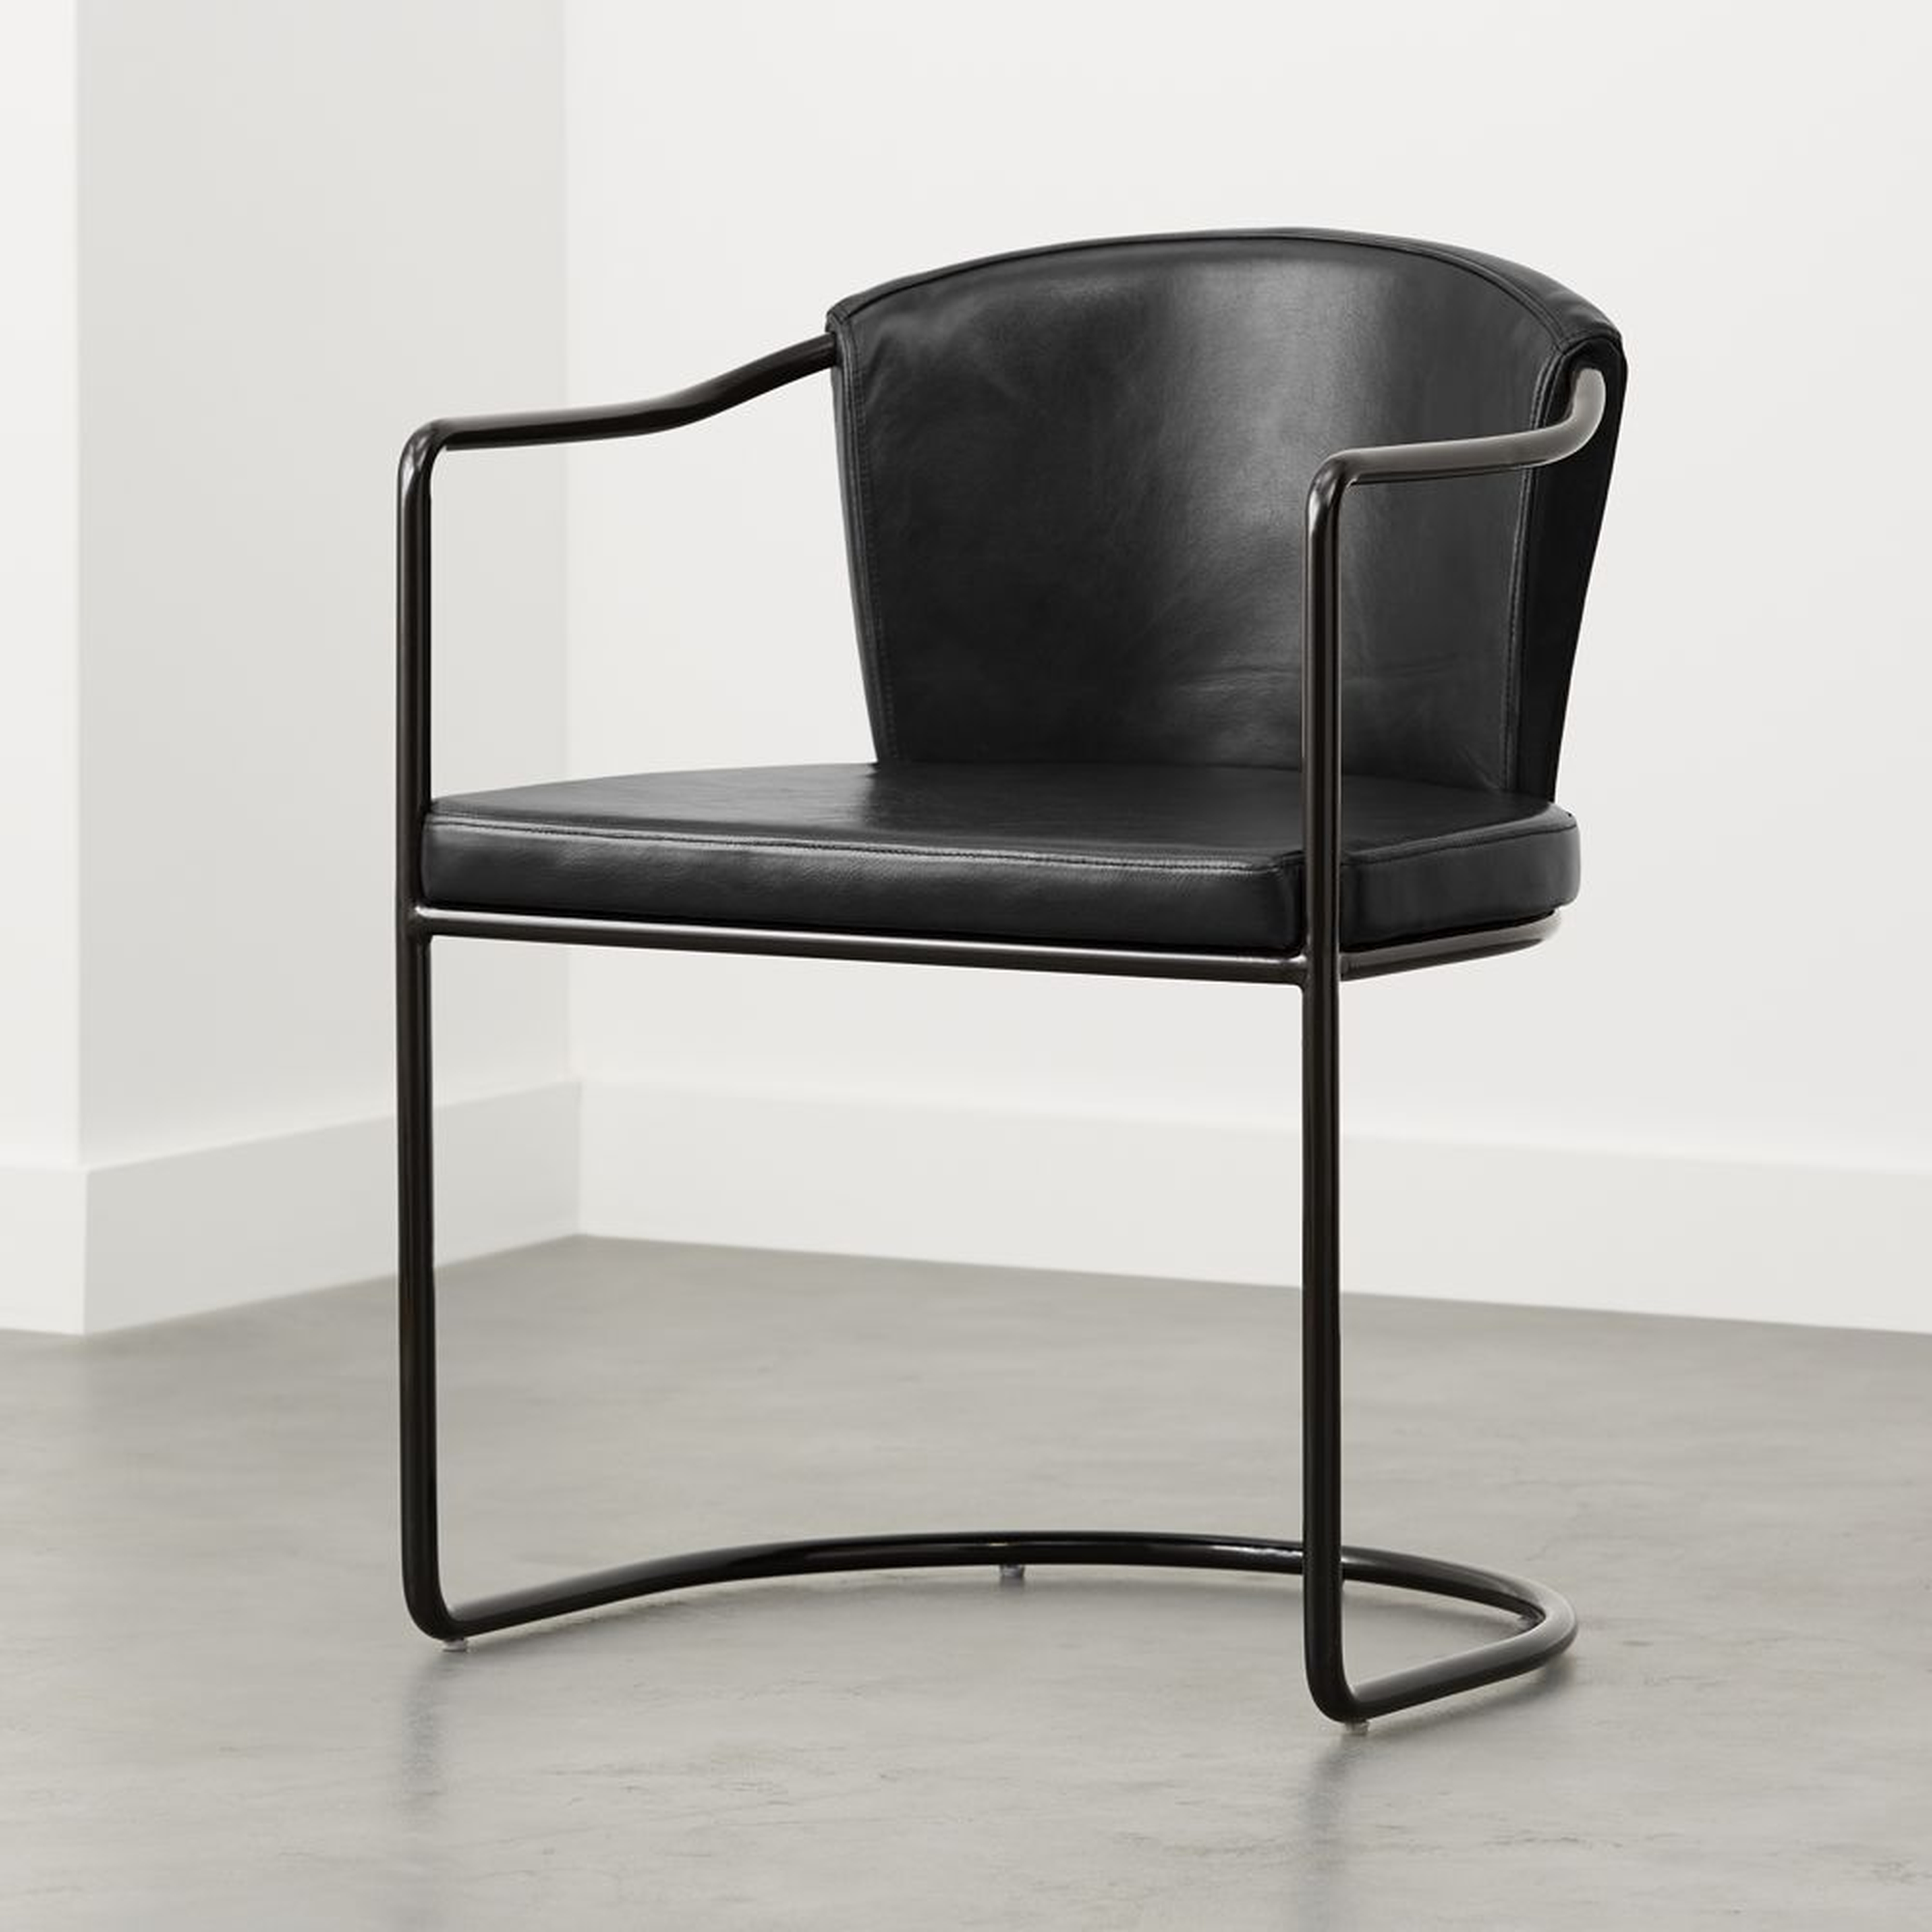 Cleo Black Cantilever Chair - CB2